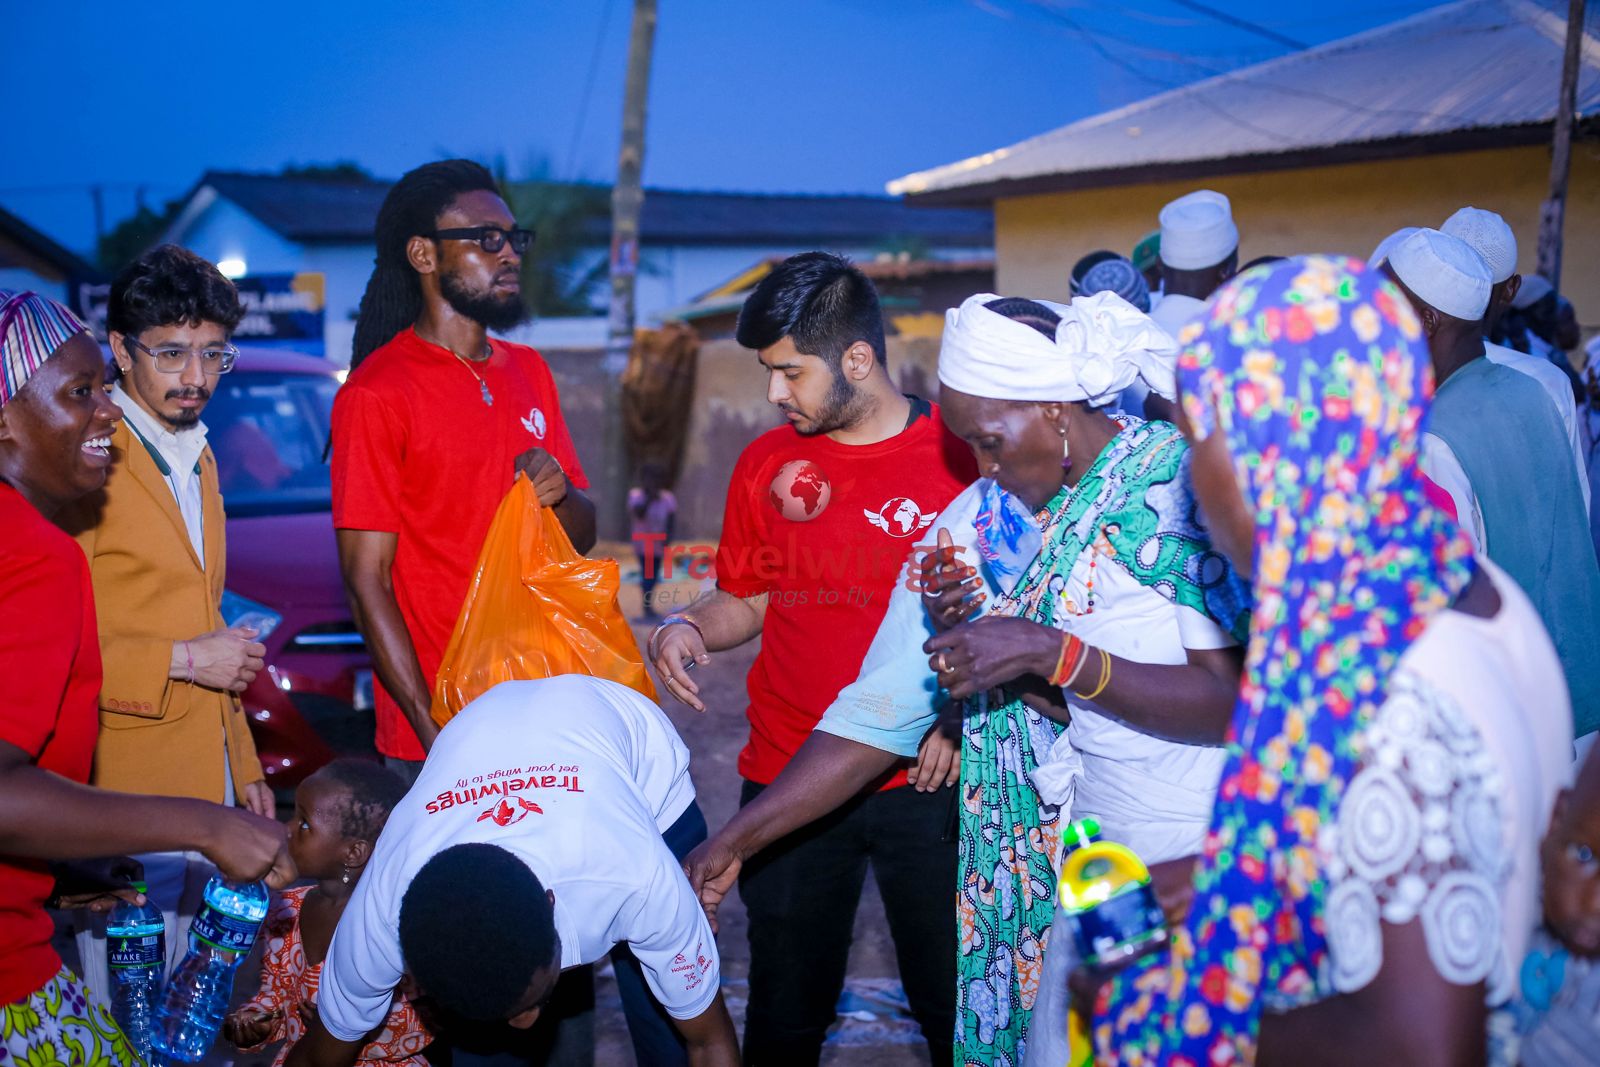 Travelwings fetes over 200 children and privileged on the street